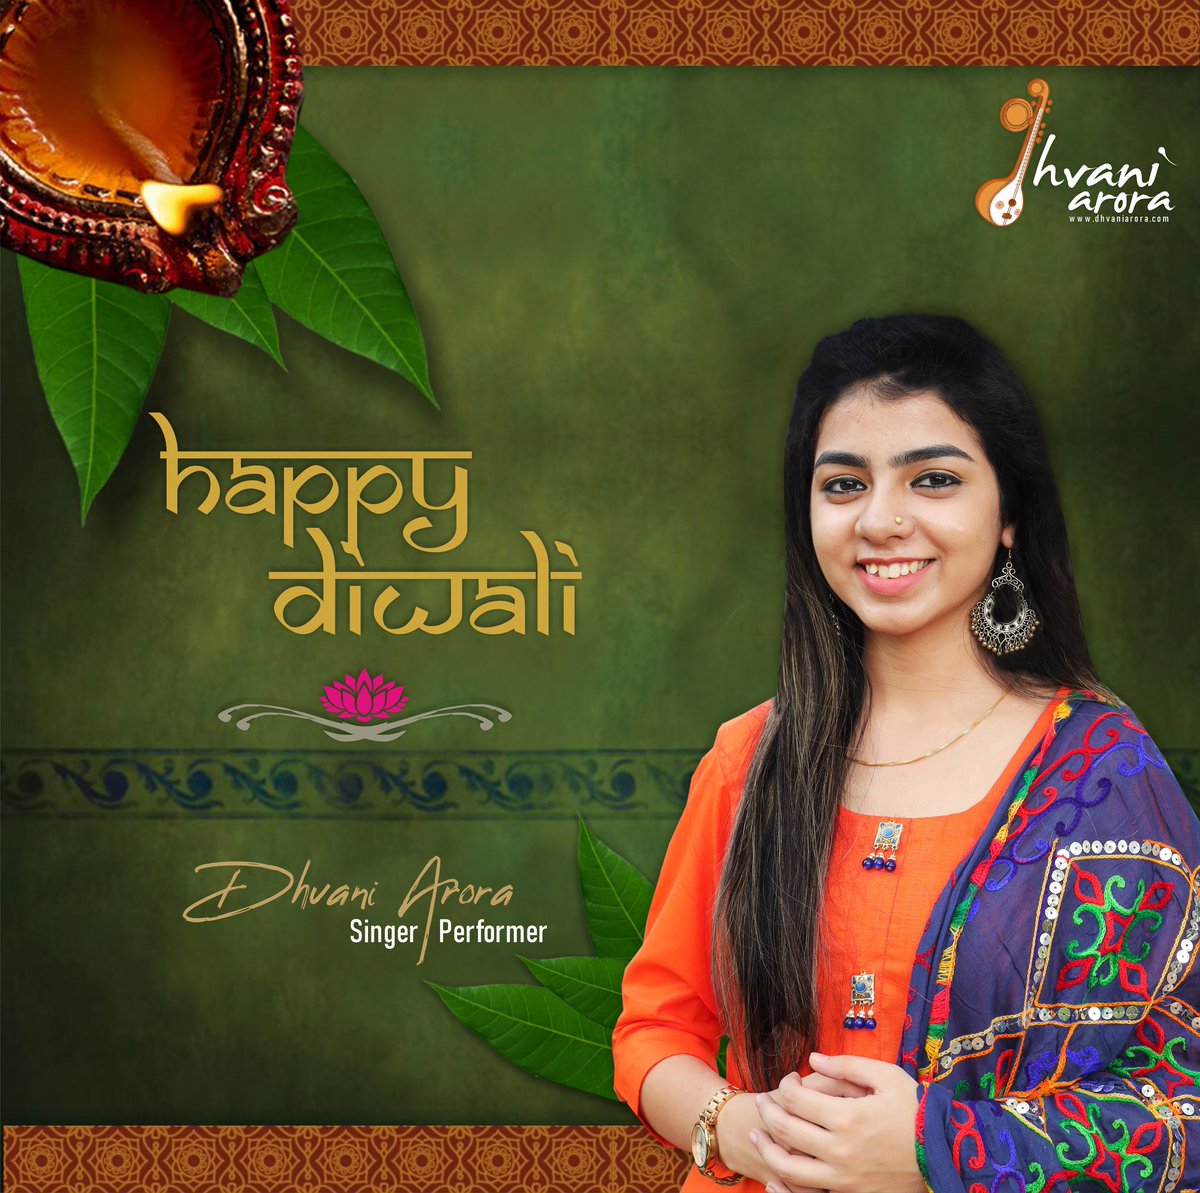 Dhvani Arora Diwali A Festival Of Lights Commemorates The Return Of Lord Rama His Wife Sita And Brother Lakshman To Ayodhya Ending A Fourteen Year Long Exile And Signifies The Victory